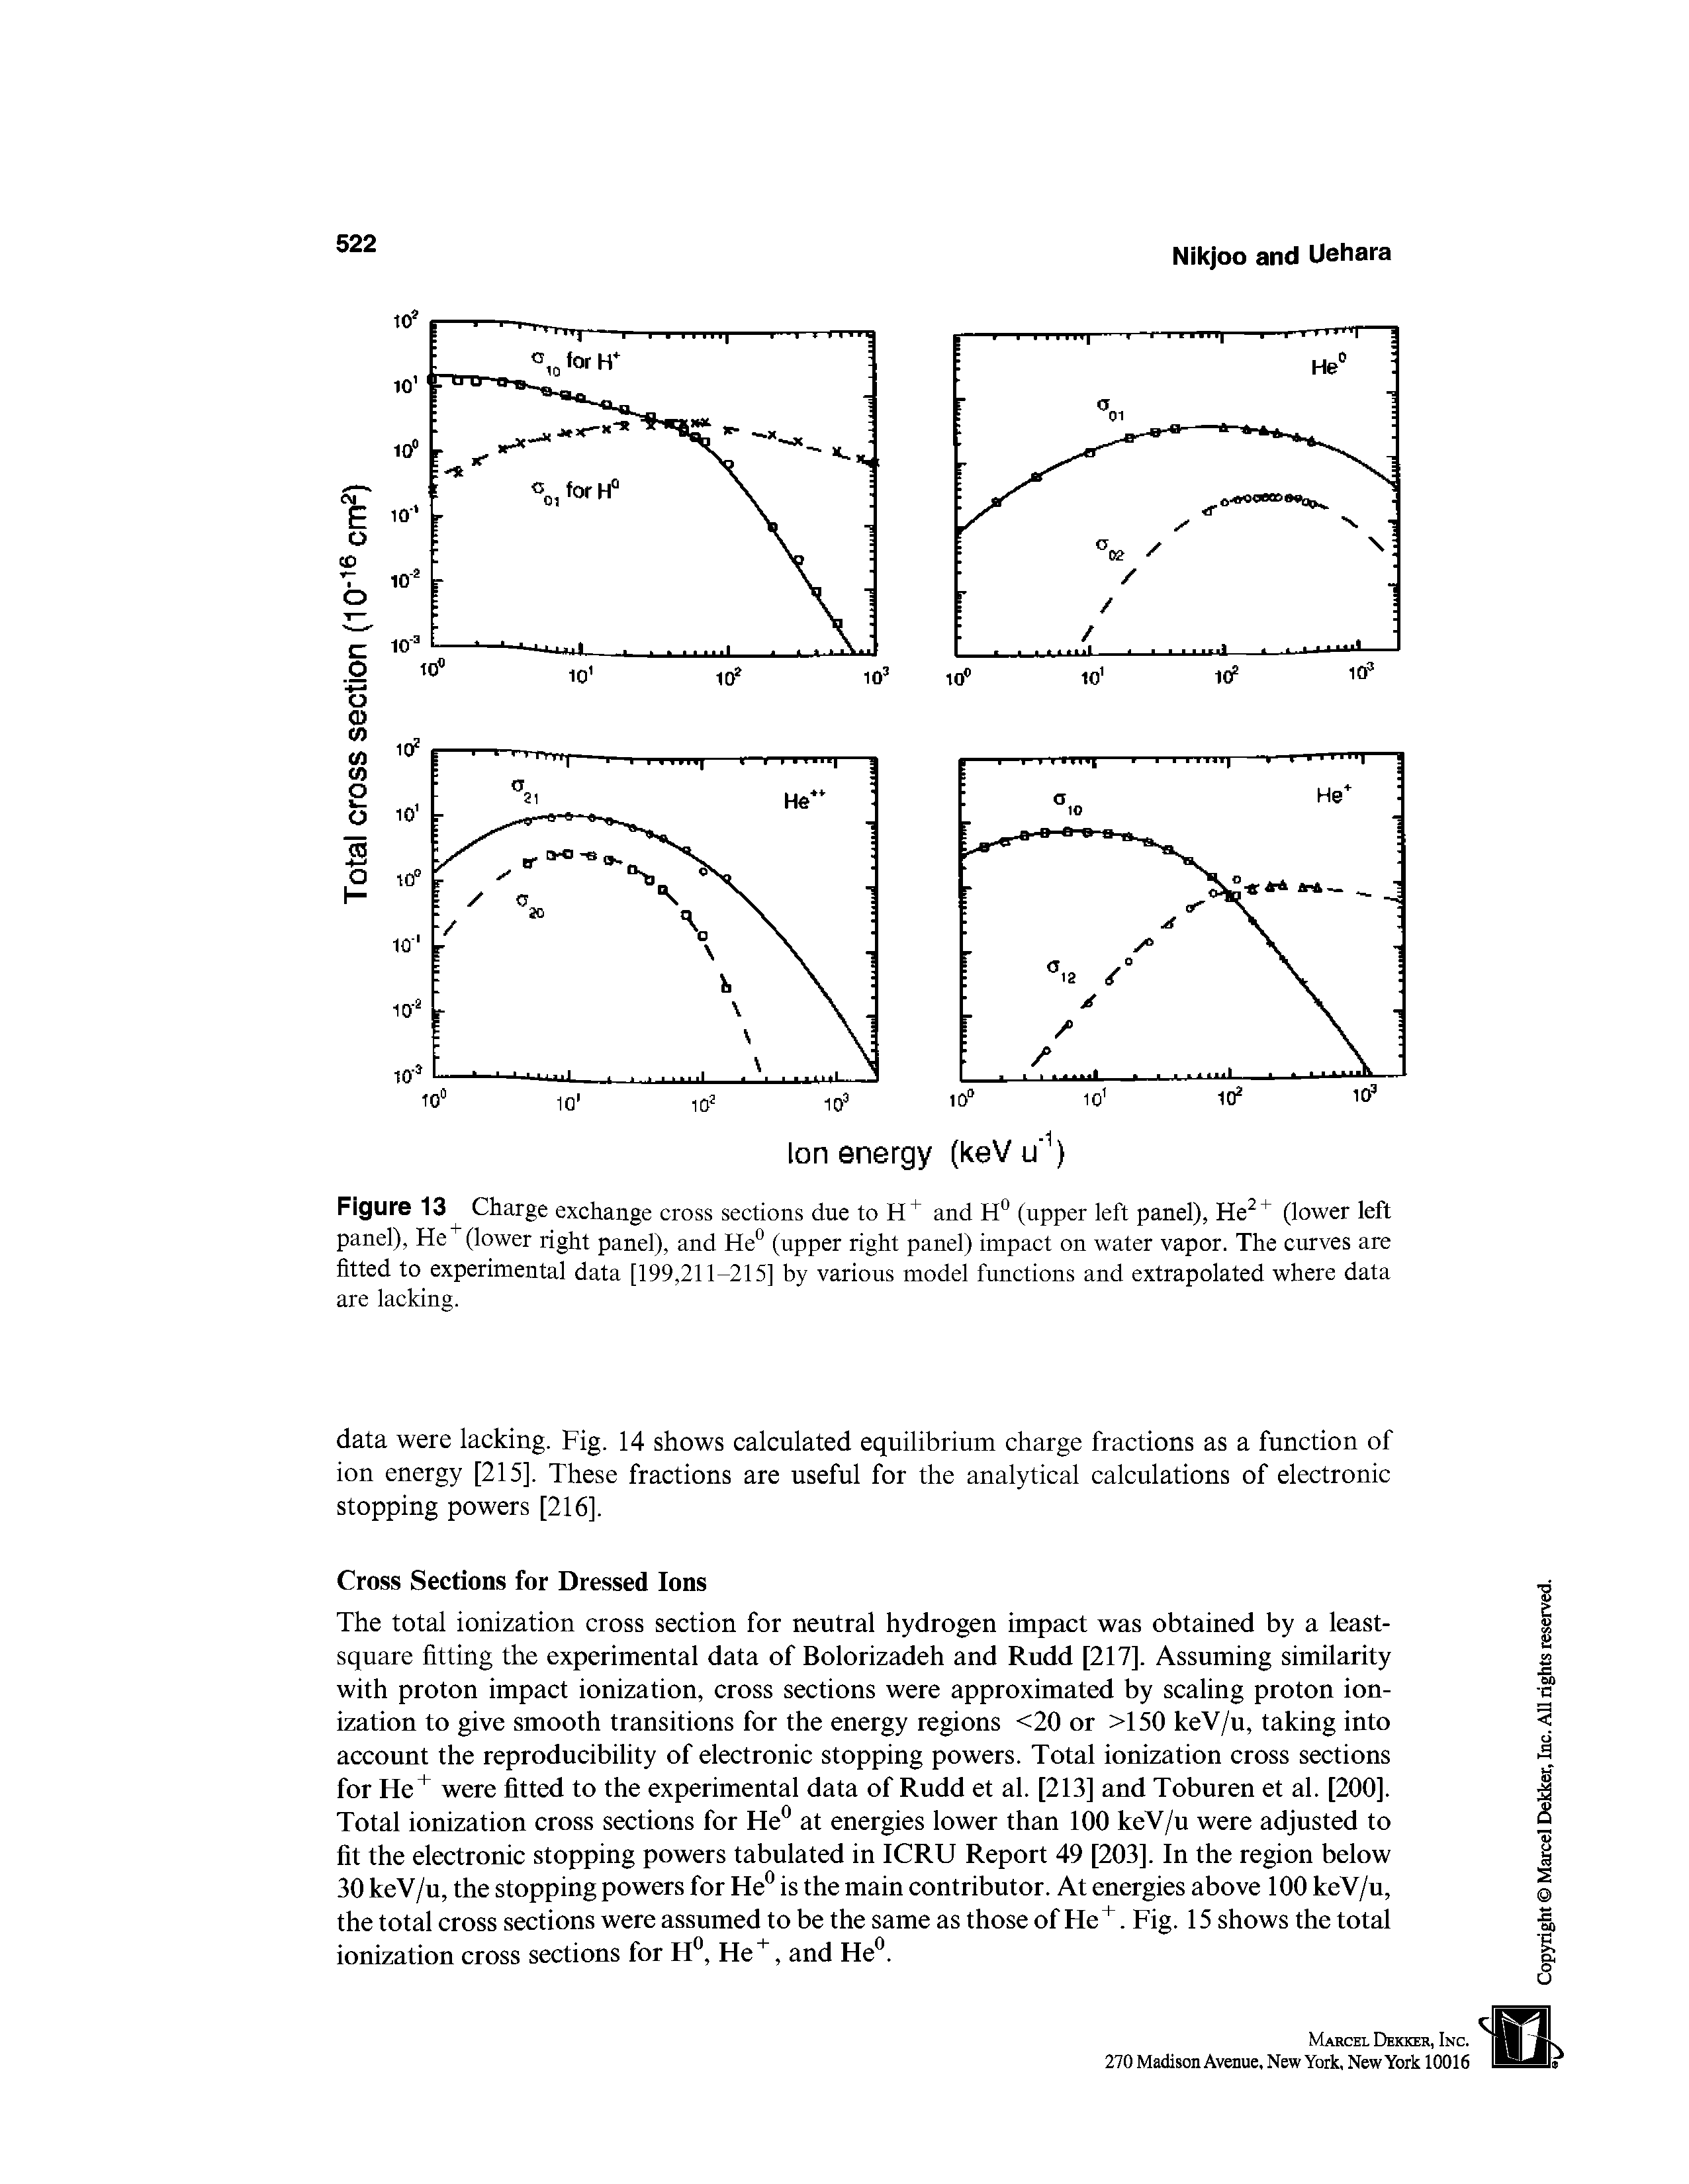 Figure 13 Charge exchange cross sections due to and (upper left panel), He (lower left panel), He (lower right panel), and He° (upper right panel) impact on water vapor. The curves are fitted to experimental data [199,211-215] by various model functions and extrapolated where data are lacking.